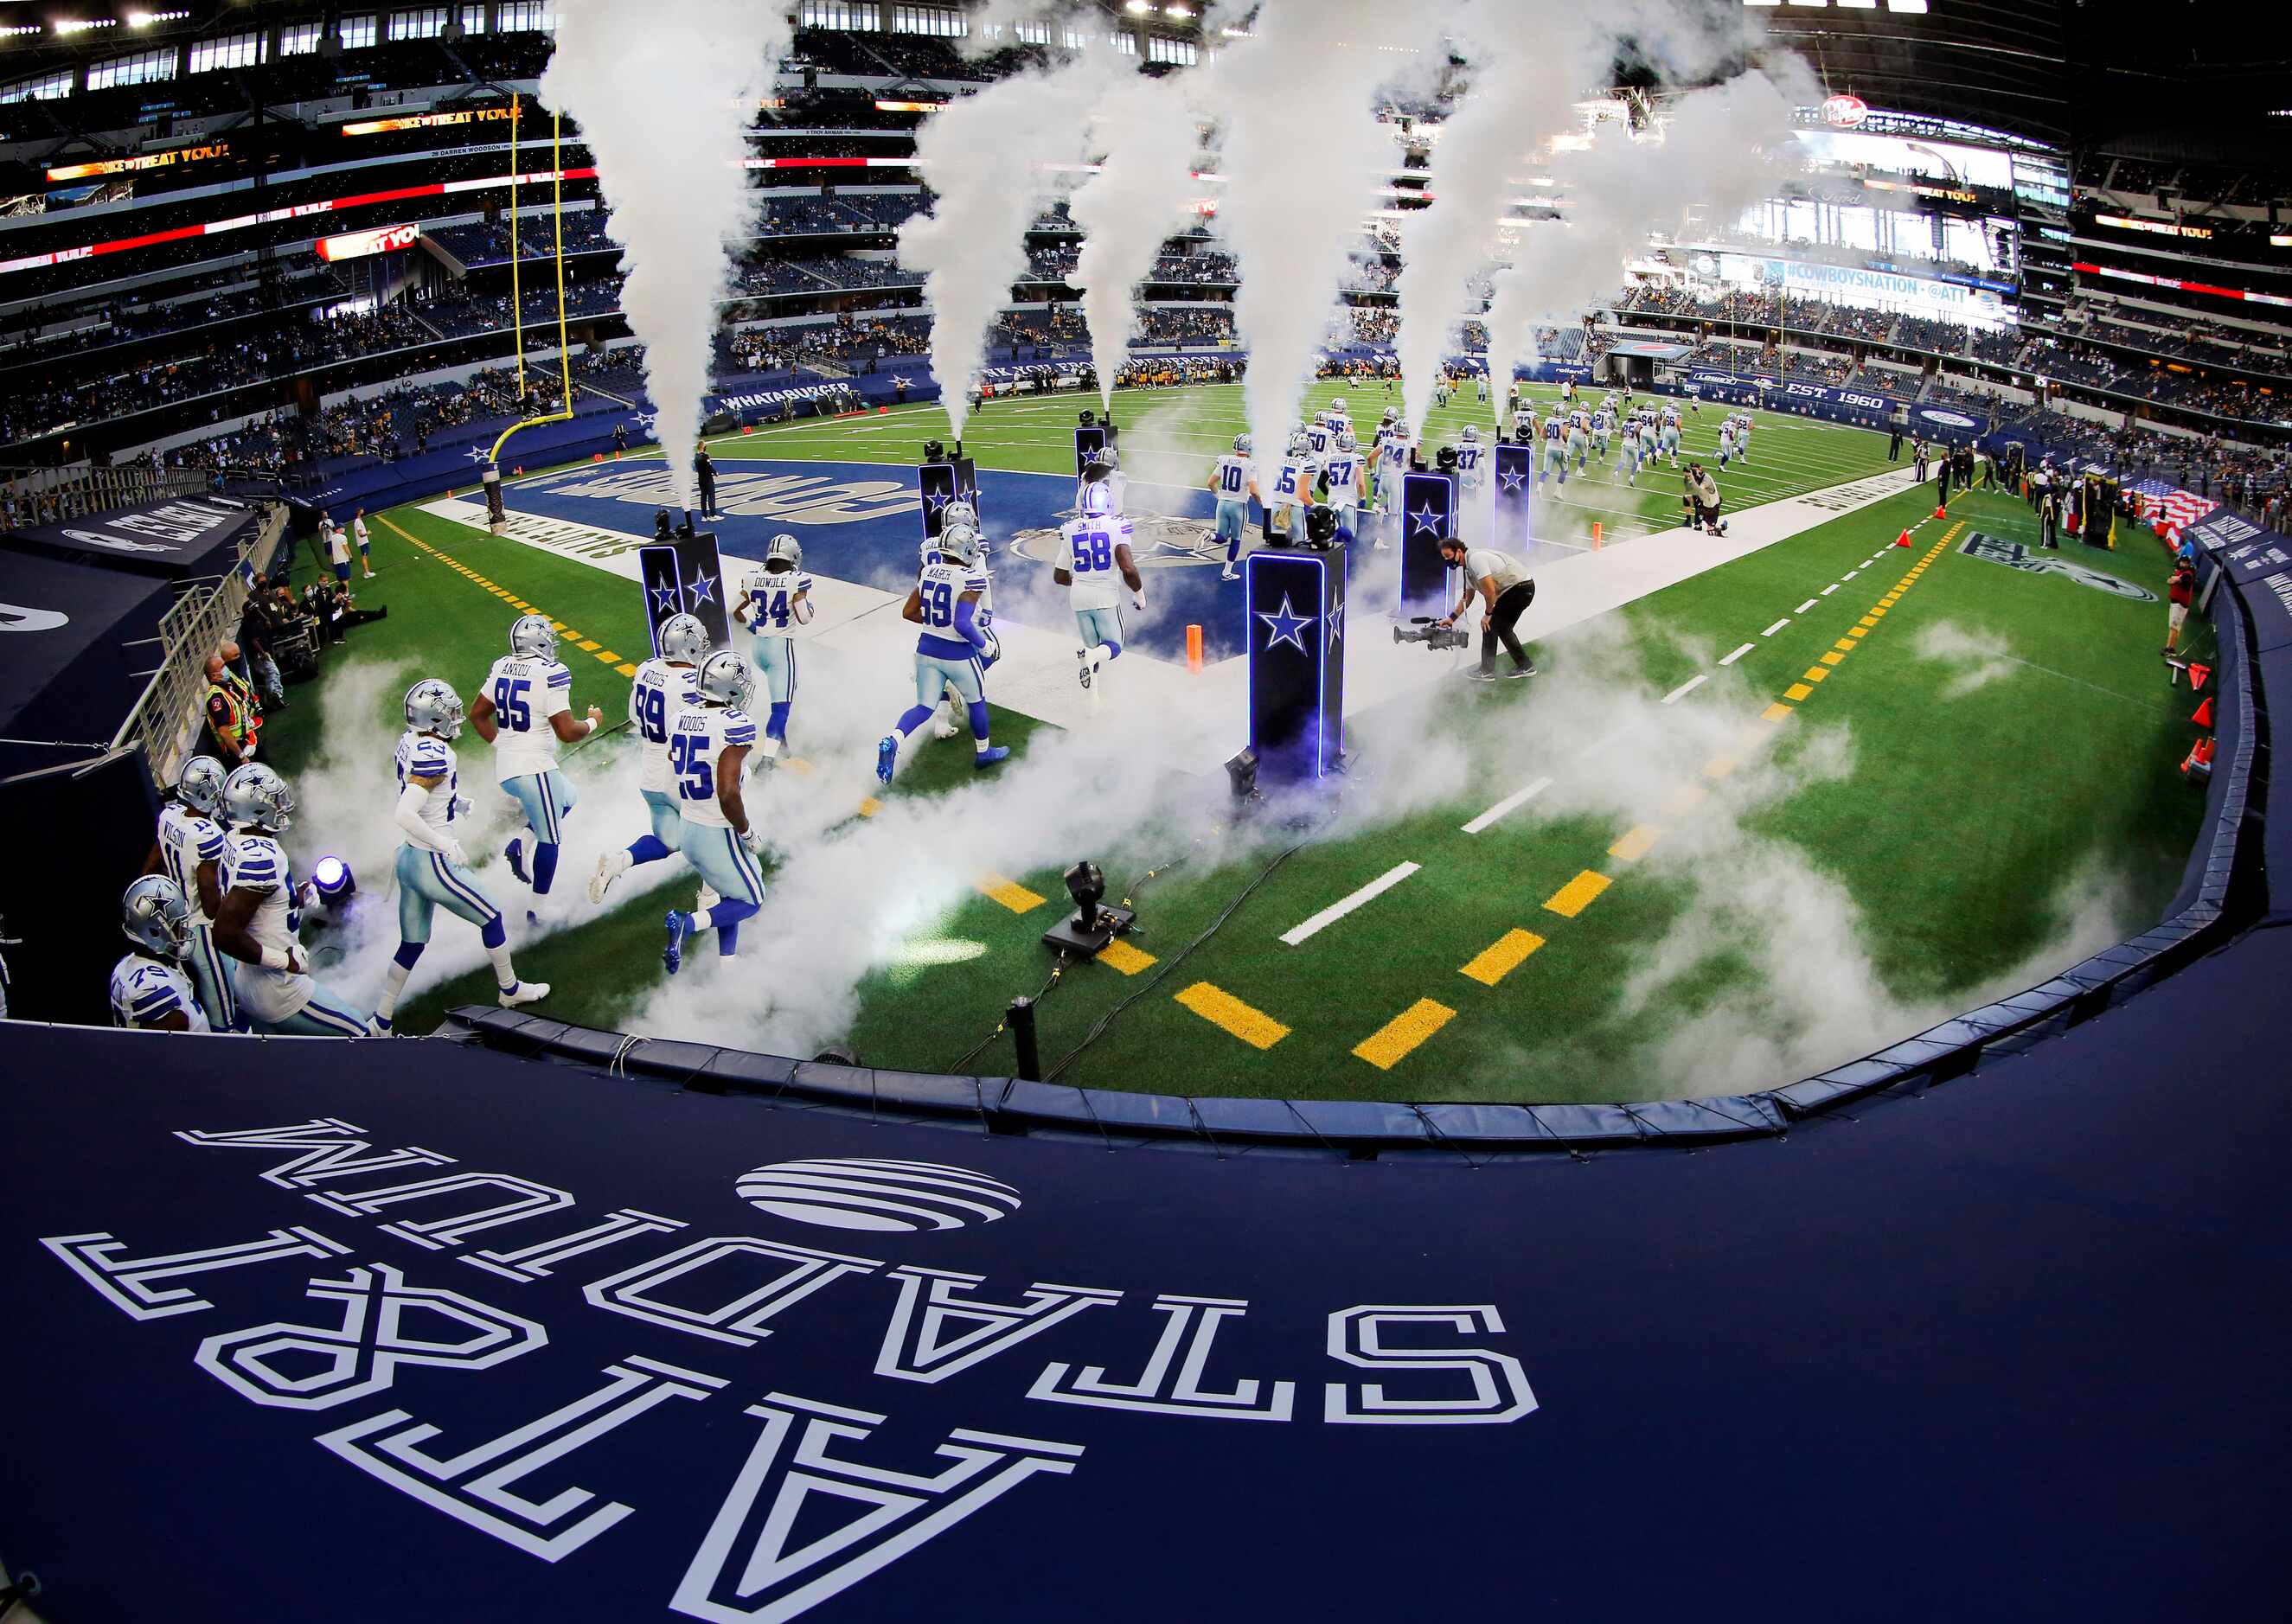 Under a veil of smoke the Dallas Cowboys football team takes the field to face the...